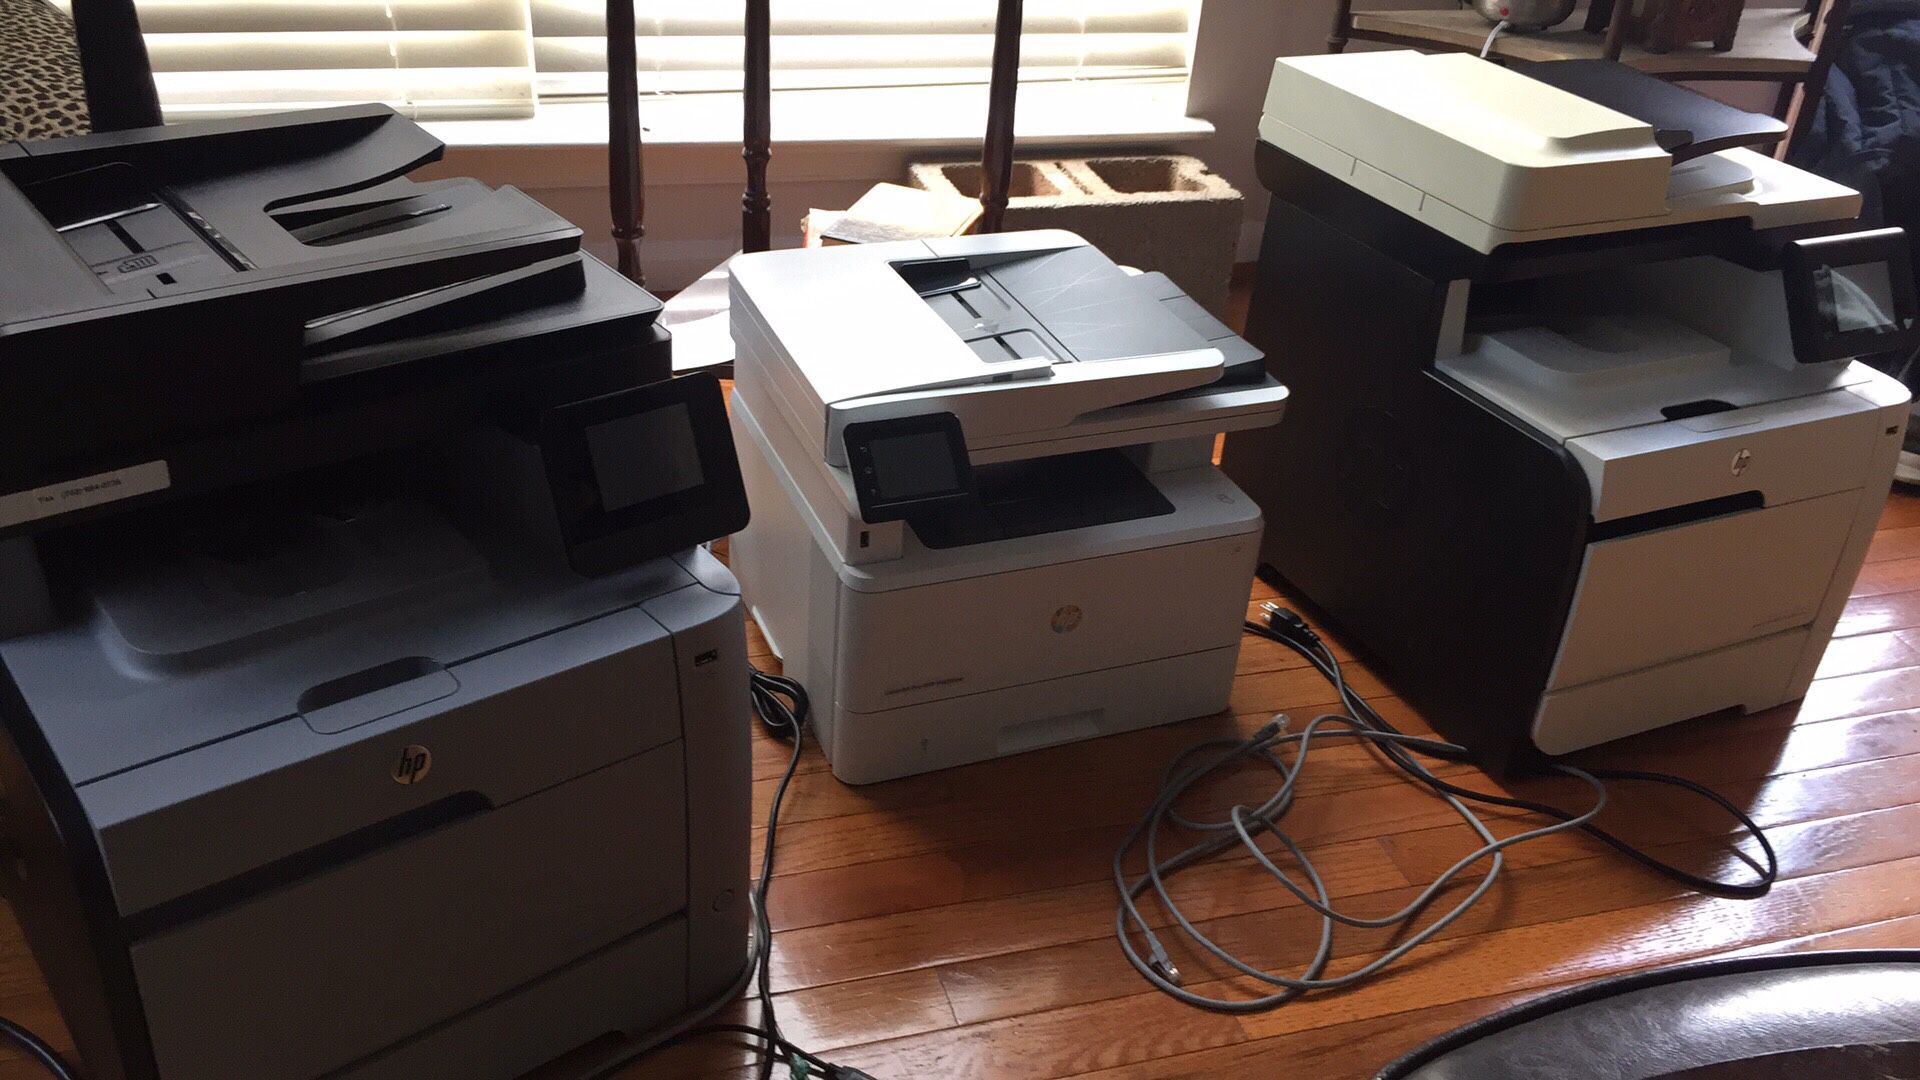 All in one - HP laser jet printer and fax machine